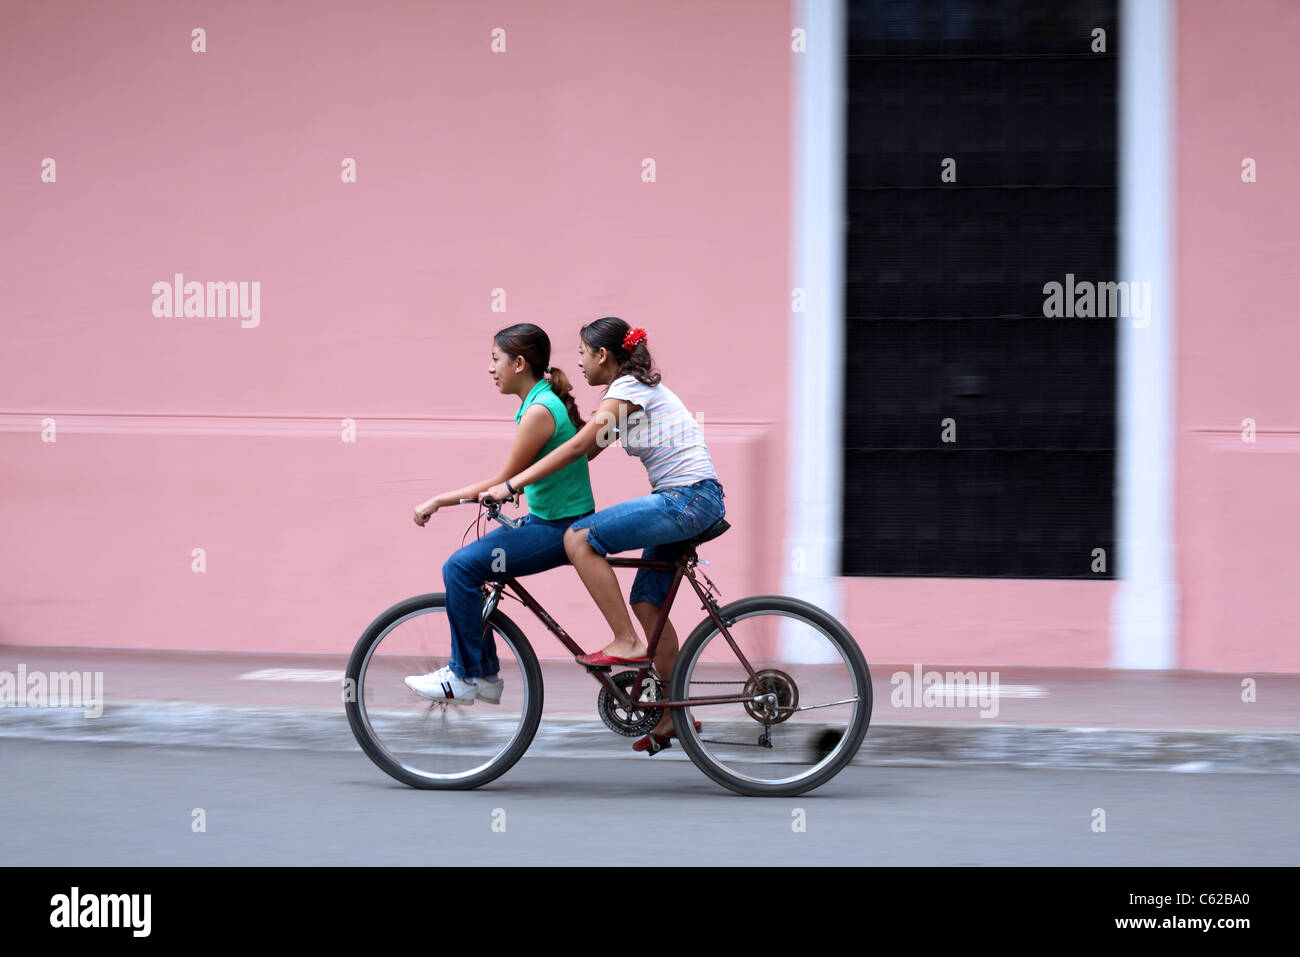 Girls riding bicycle past pink building. Stock Photo